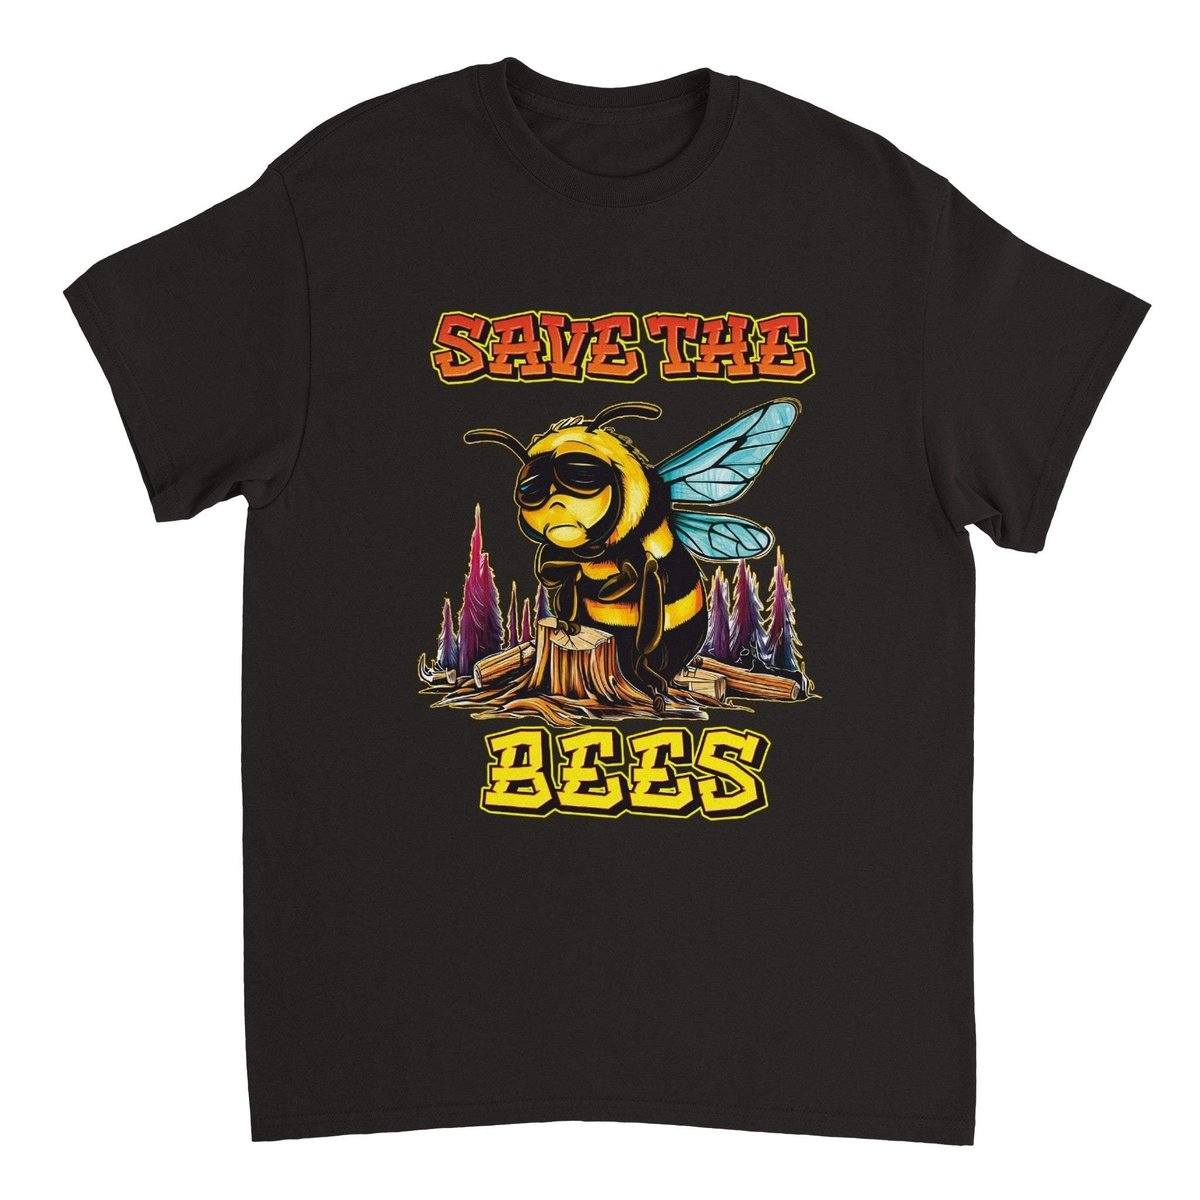 Save The Bees Tshirt - Crying Bee - Unisex Crewneck T-shirt Australia Online Color Black / S